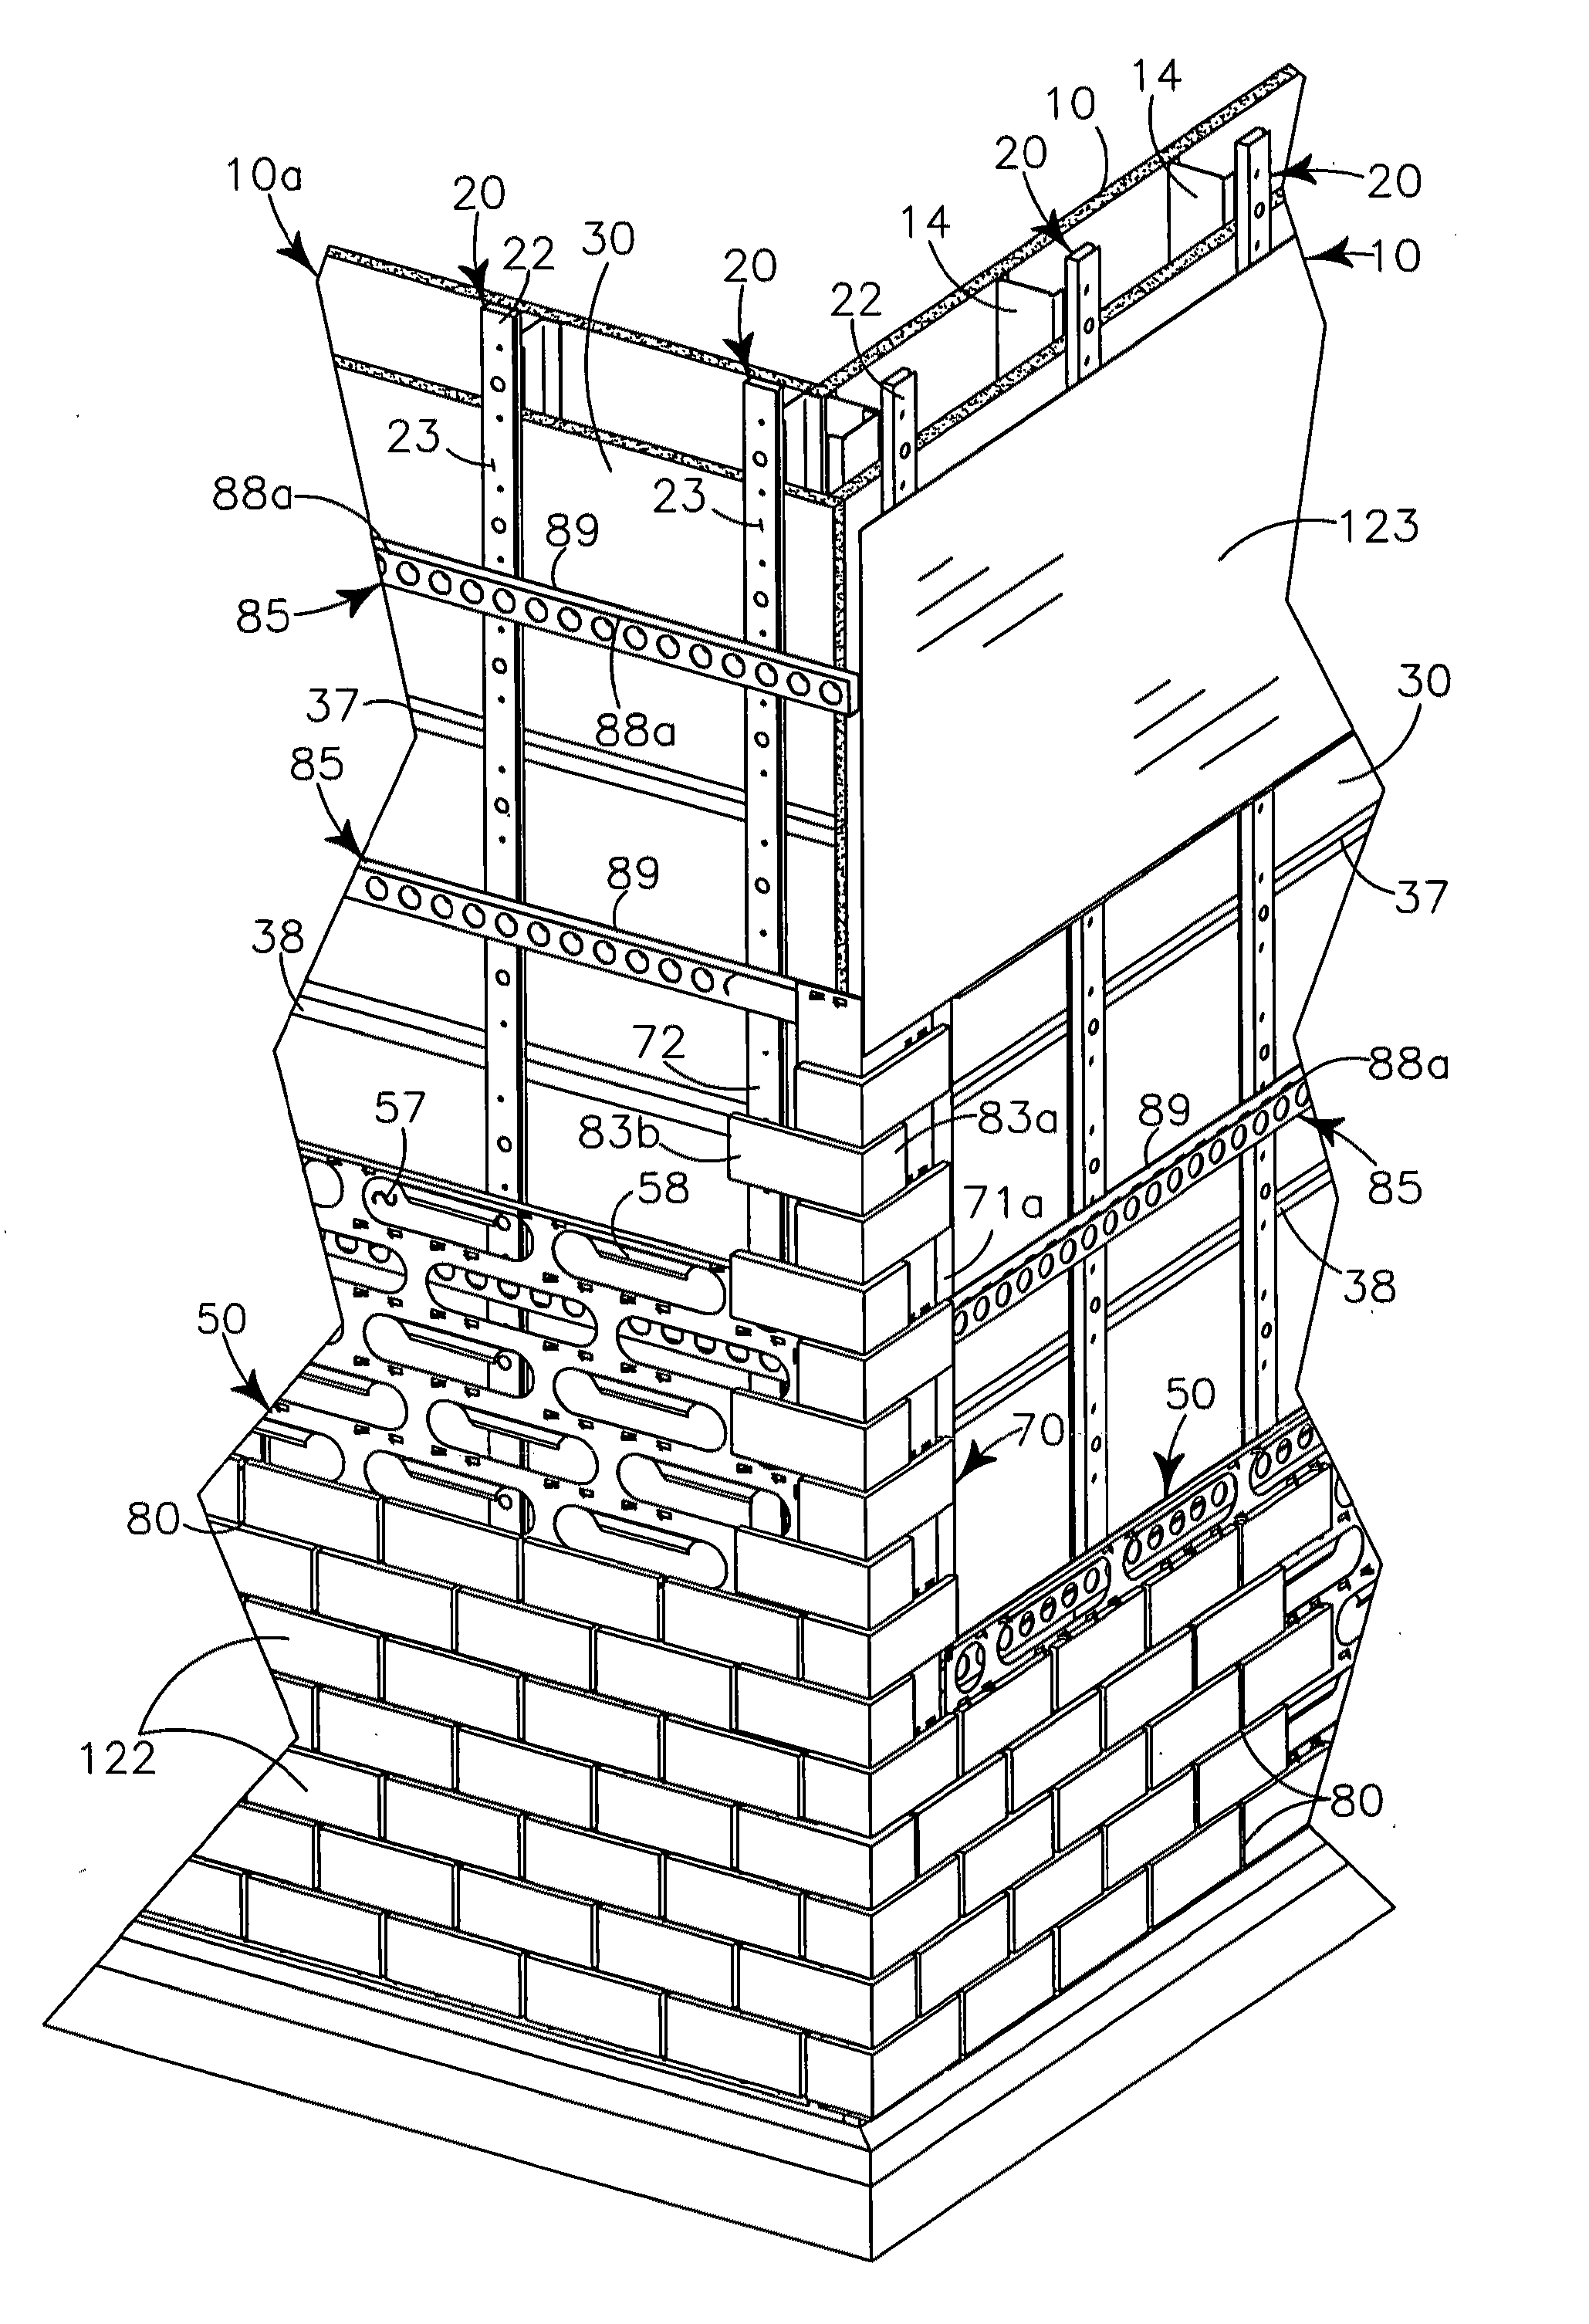 Modular system for cladding exterior walls of a structure and insulating the structure walls